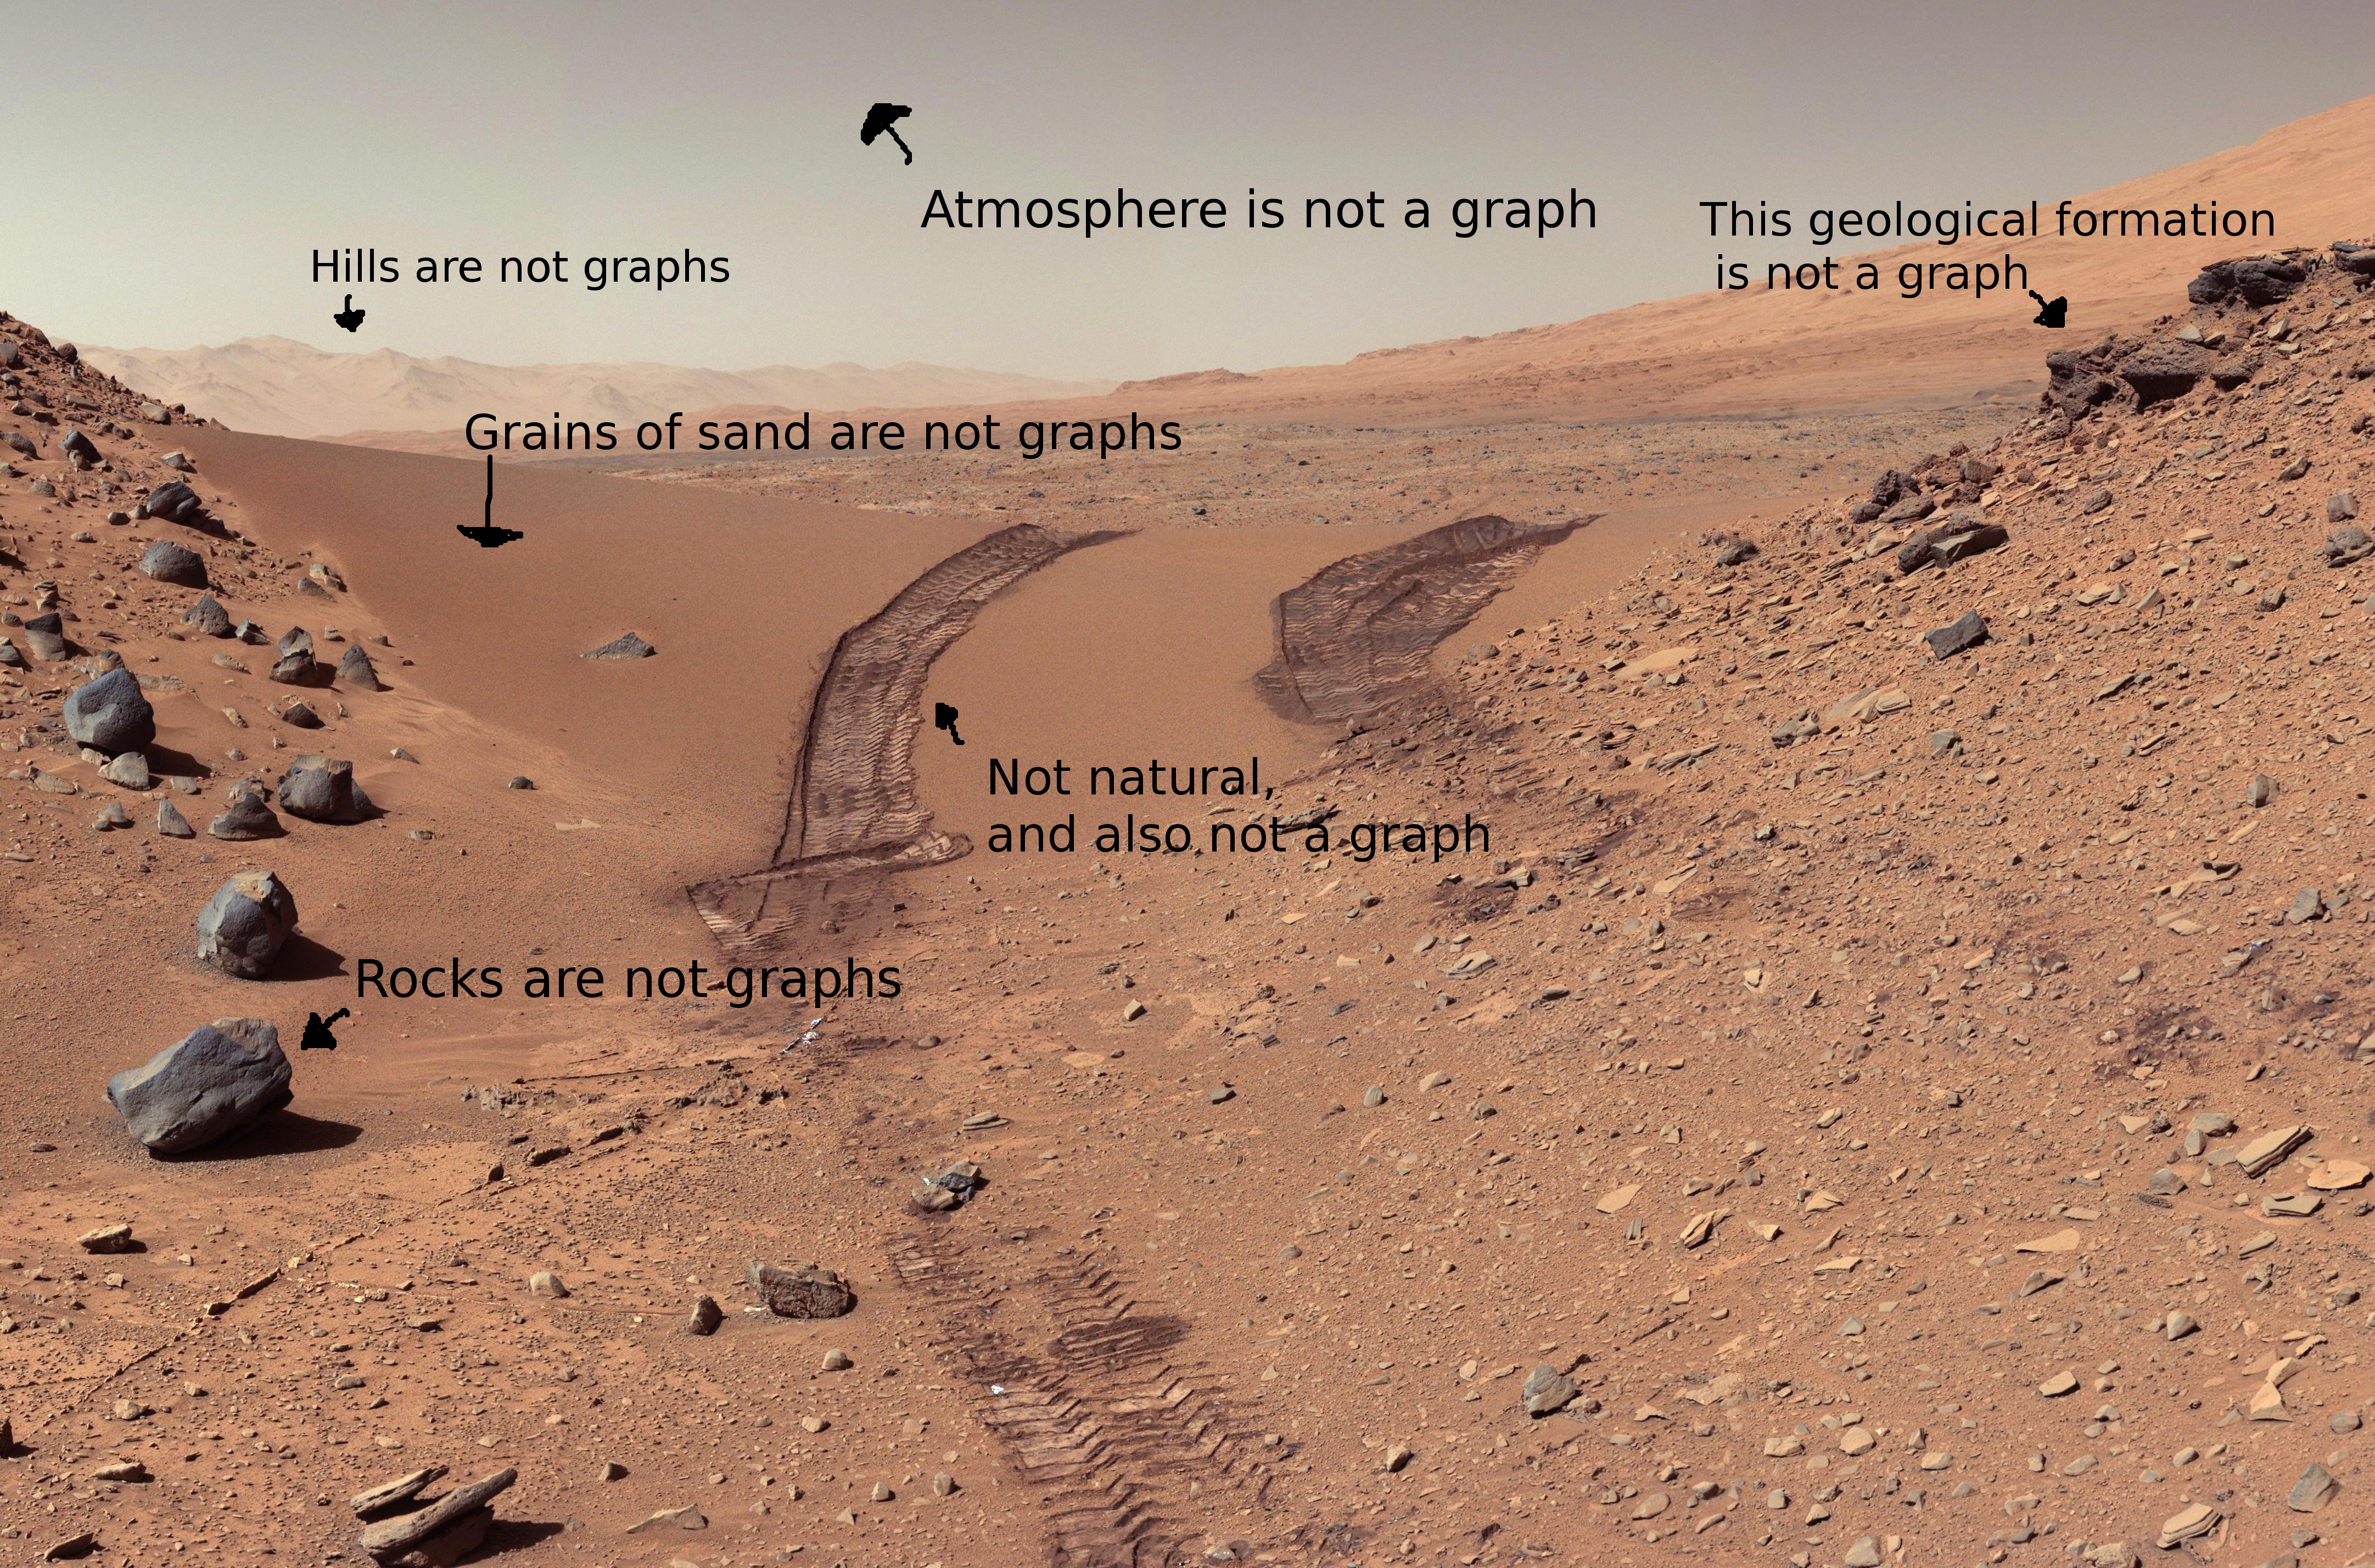 Mars is devoid of graph-like structures